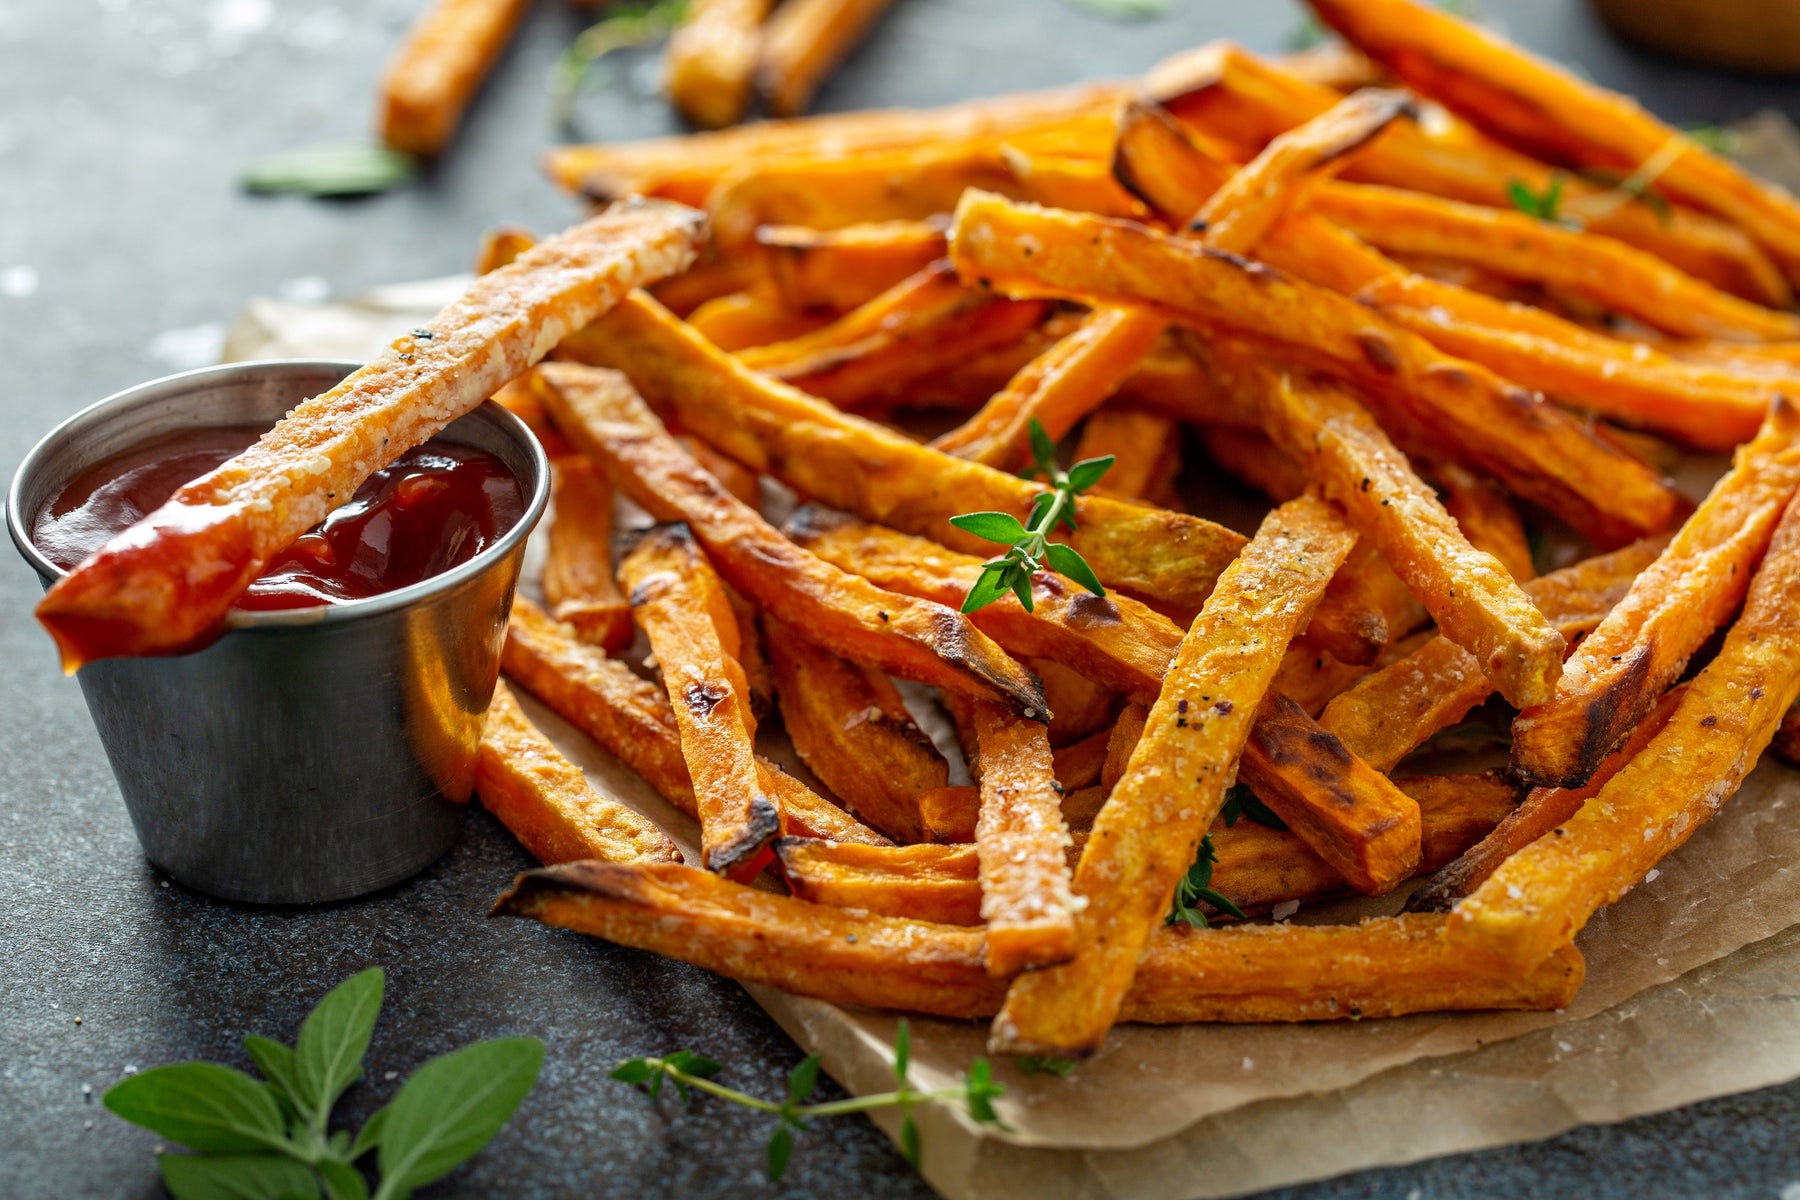 How to Make Oven-Baked Sweet Potato Fries